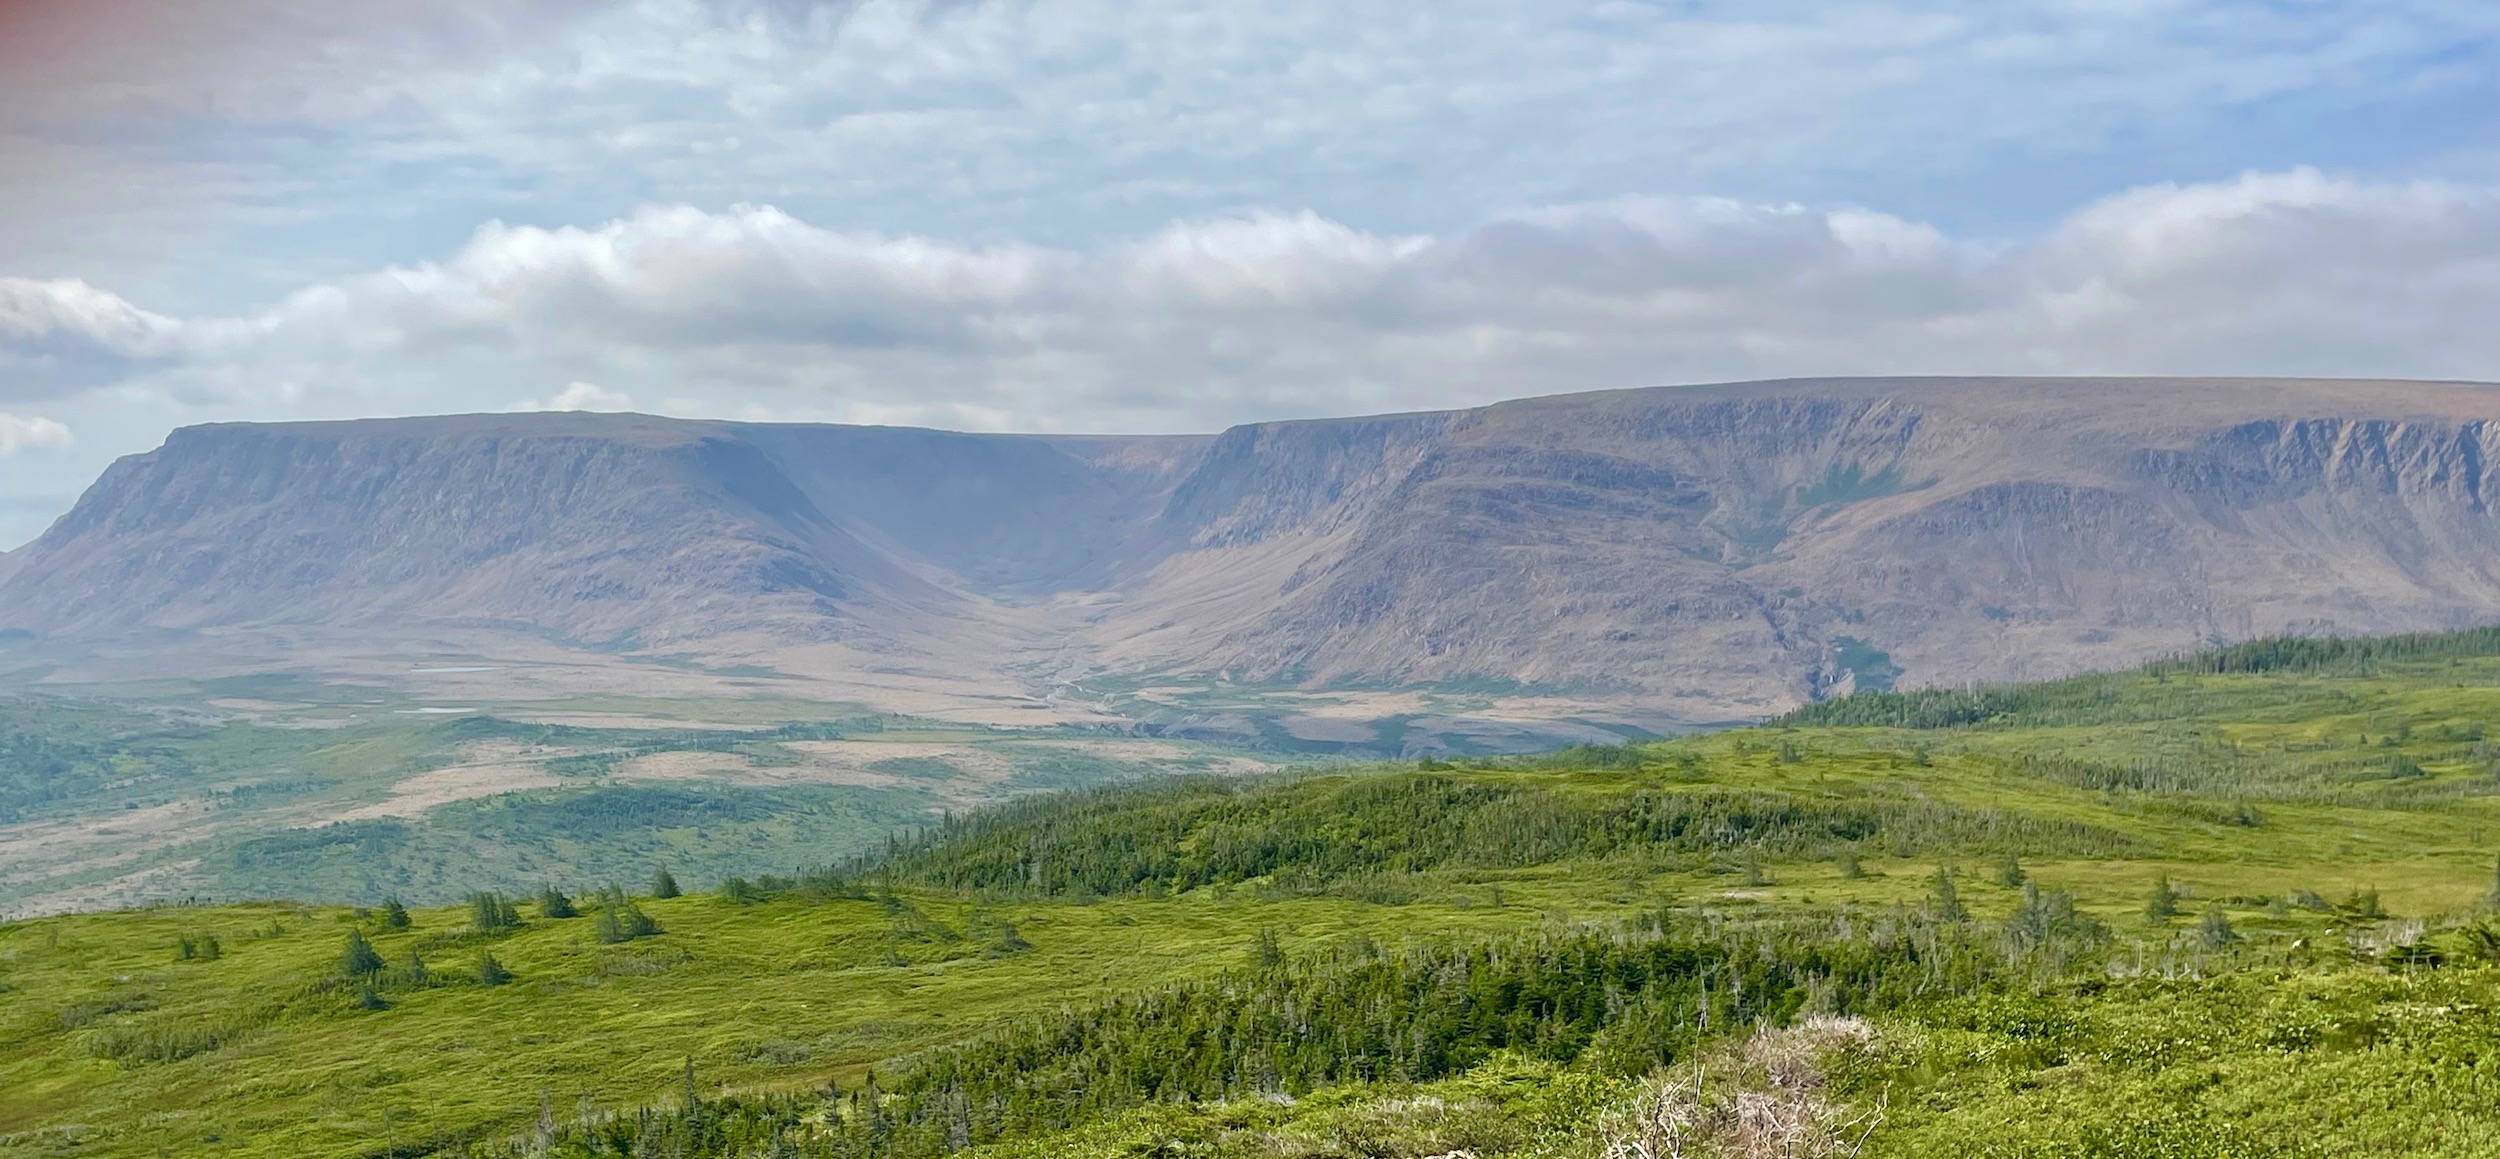 Tablelands from Lookout Trail, Gros Morne